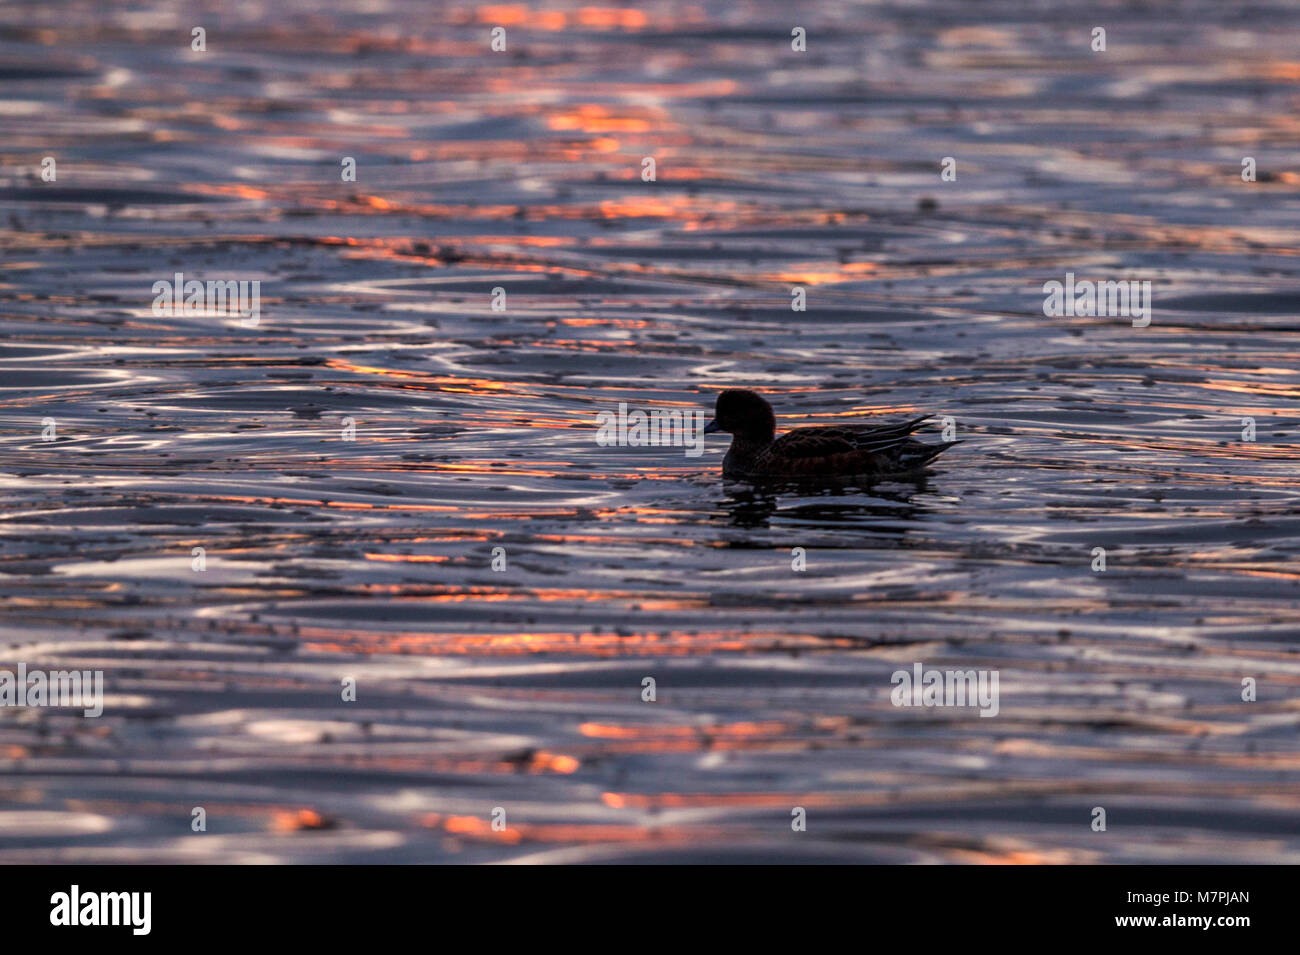 Wetland Birds sunset silhouette, waterfowl depicted at sunset, silhouetted against rippling estuary waters, bathed blue and gold shimmering light. Stock Photo